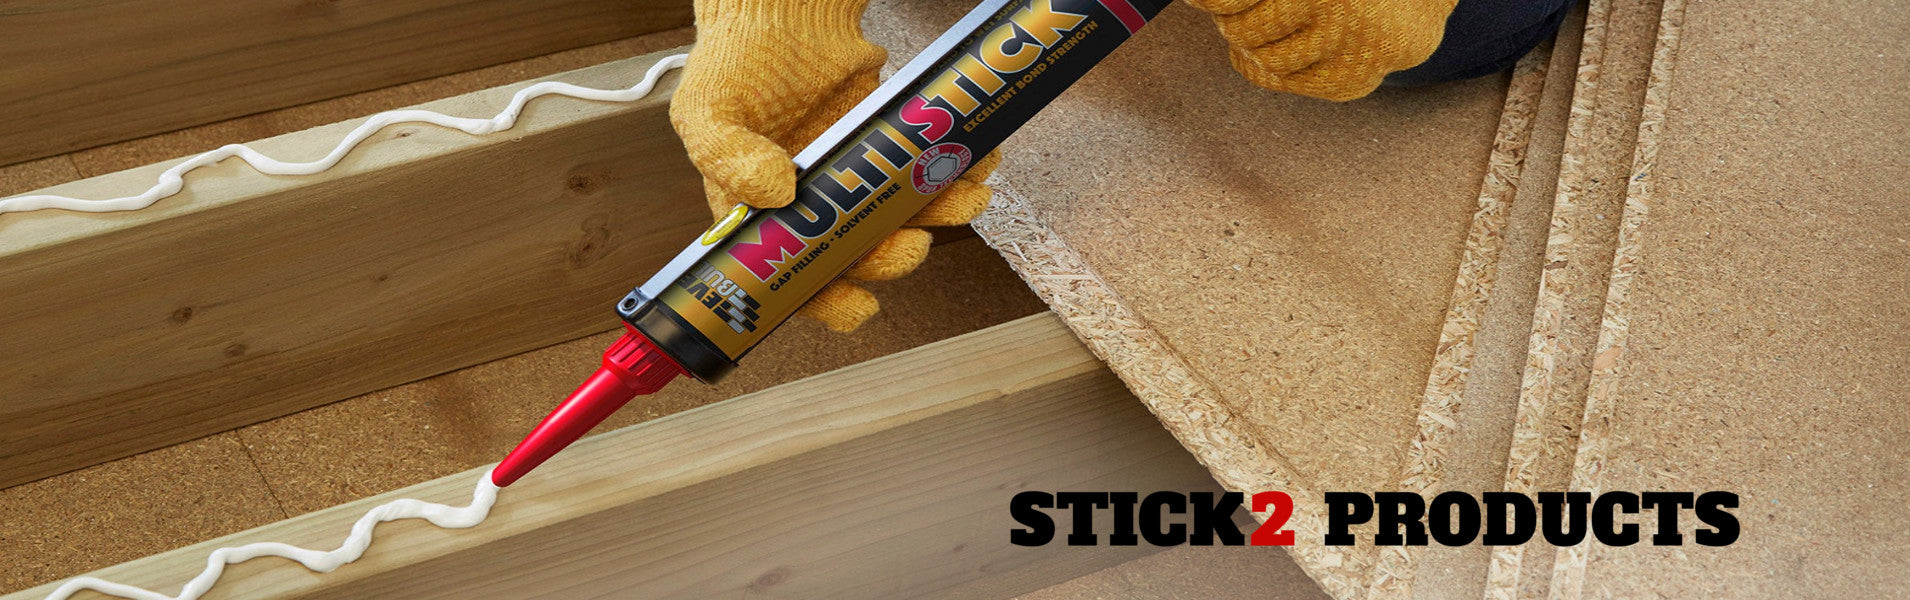 Adhesive for Builders & DIY from STICK2 Products